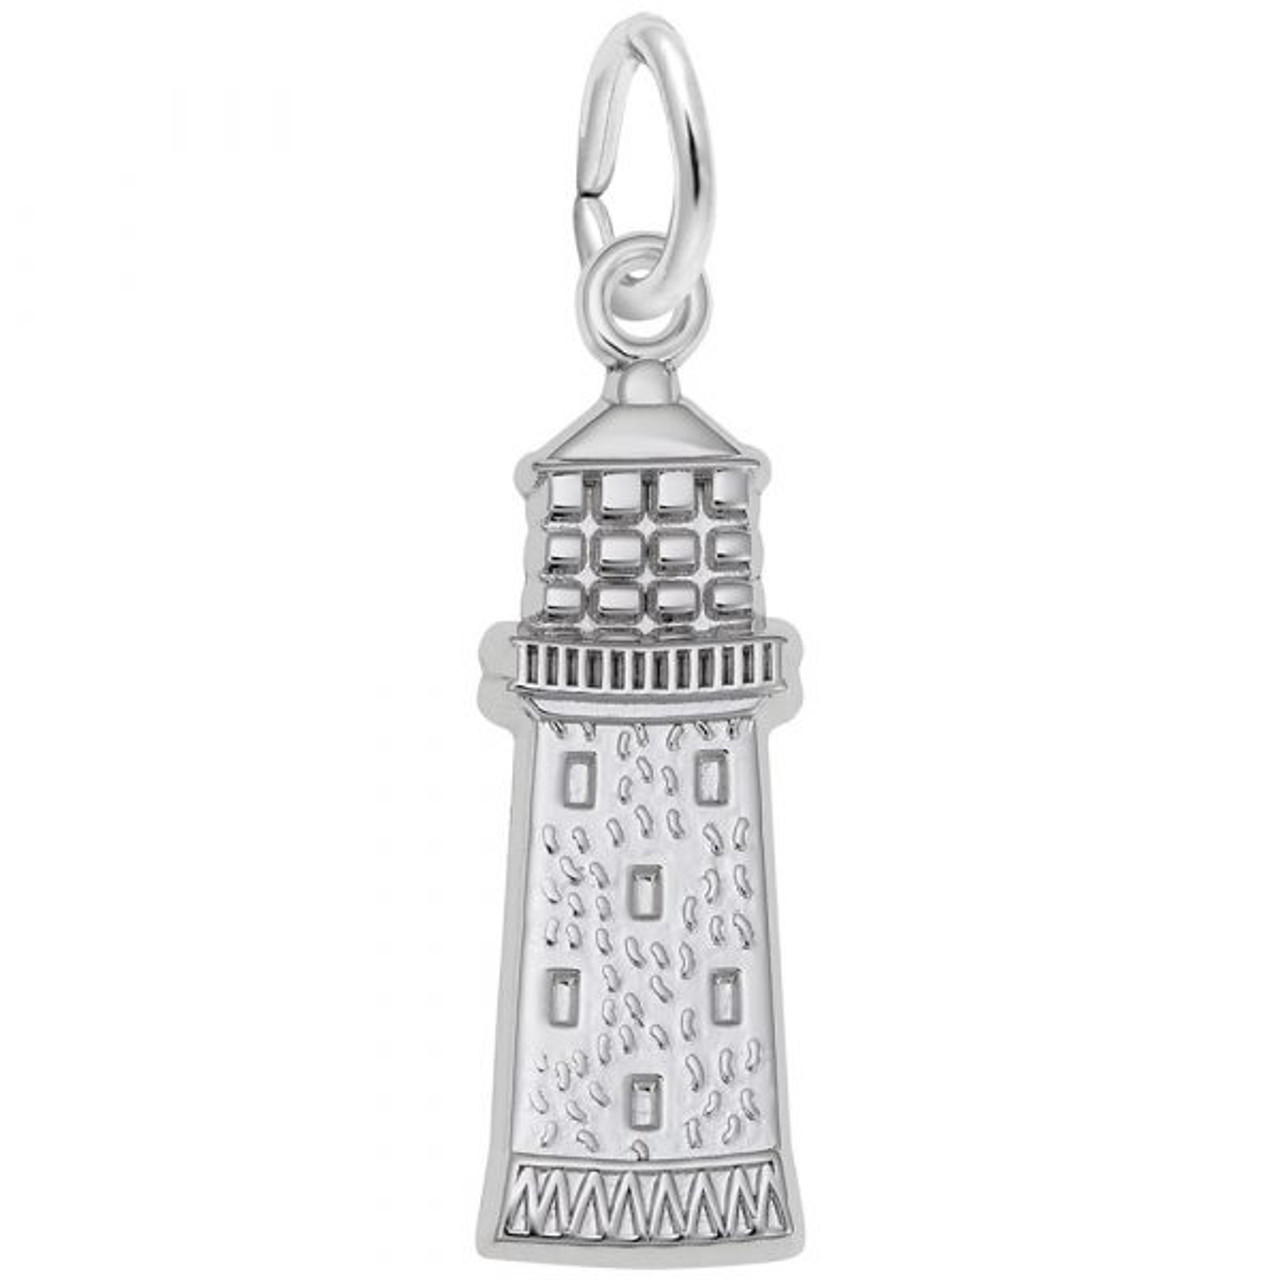 Gibbs Bermuda Flat Lighthouse Silver Charm - Sterling Silver and 14k White Gold